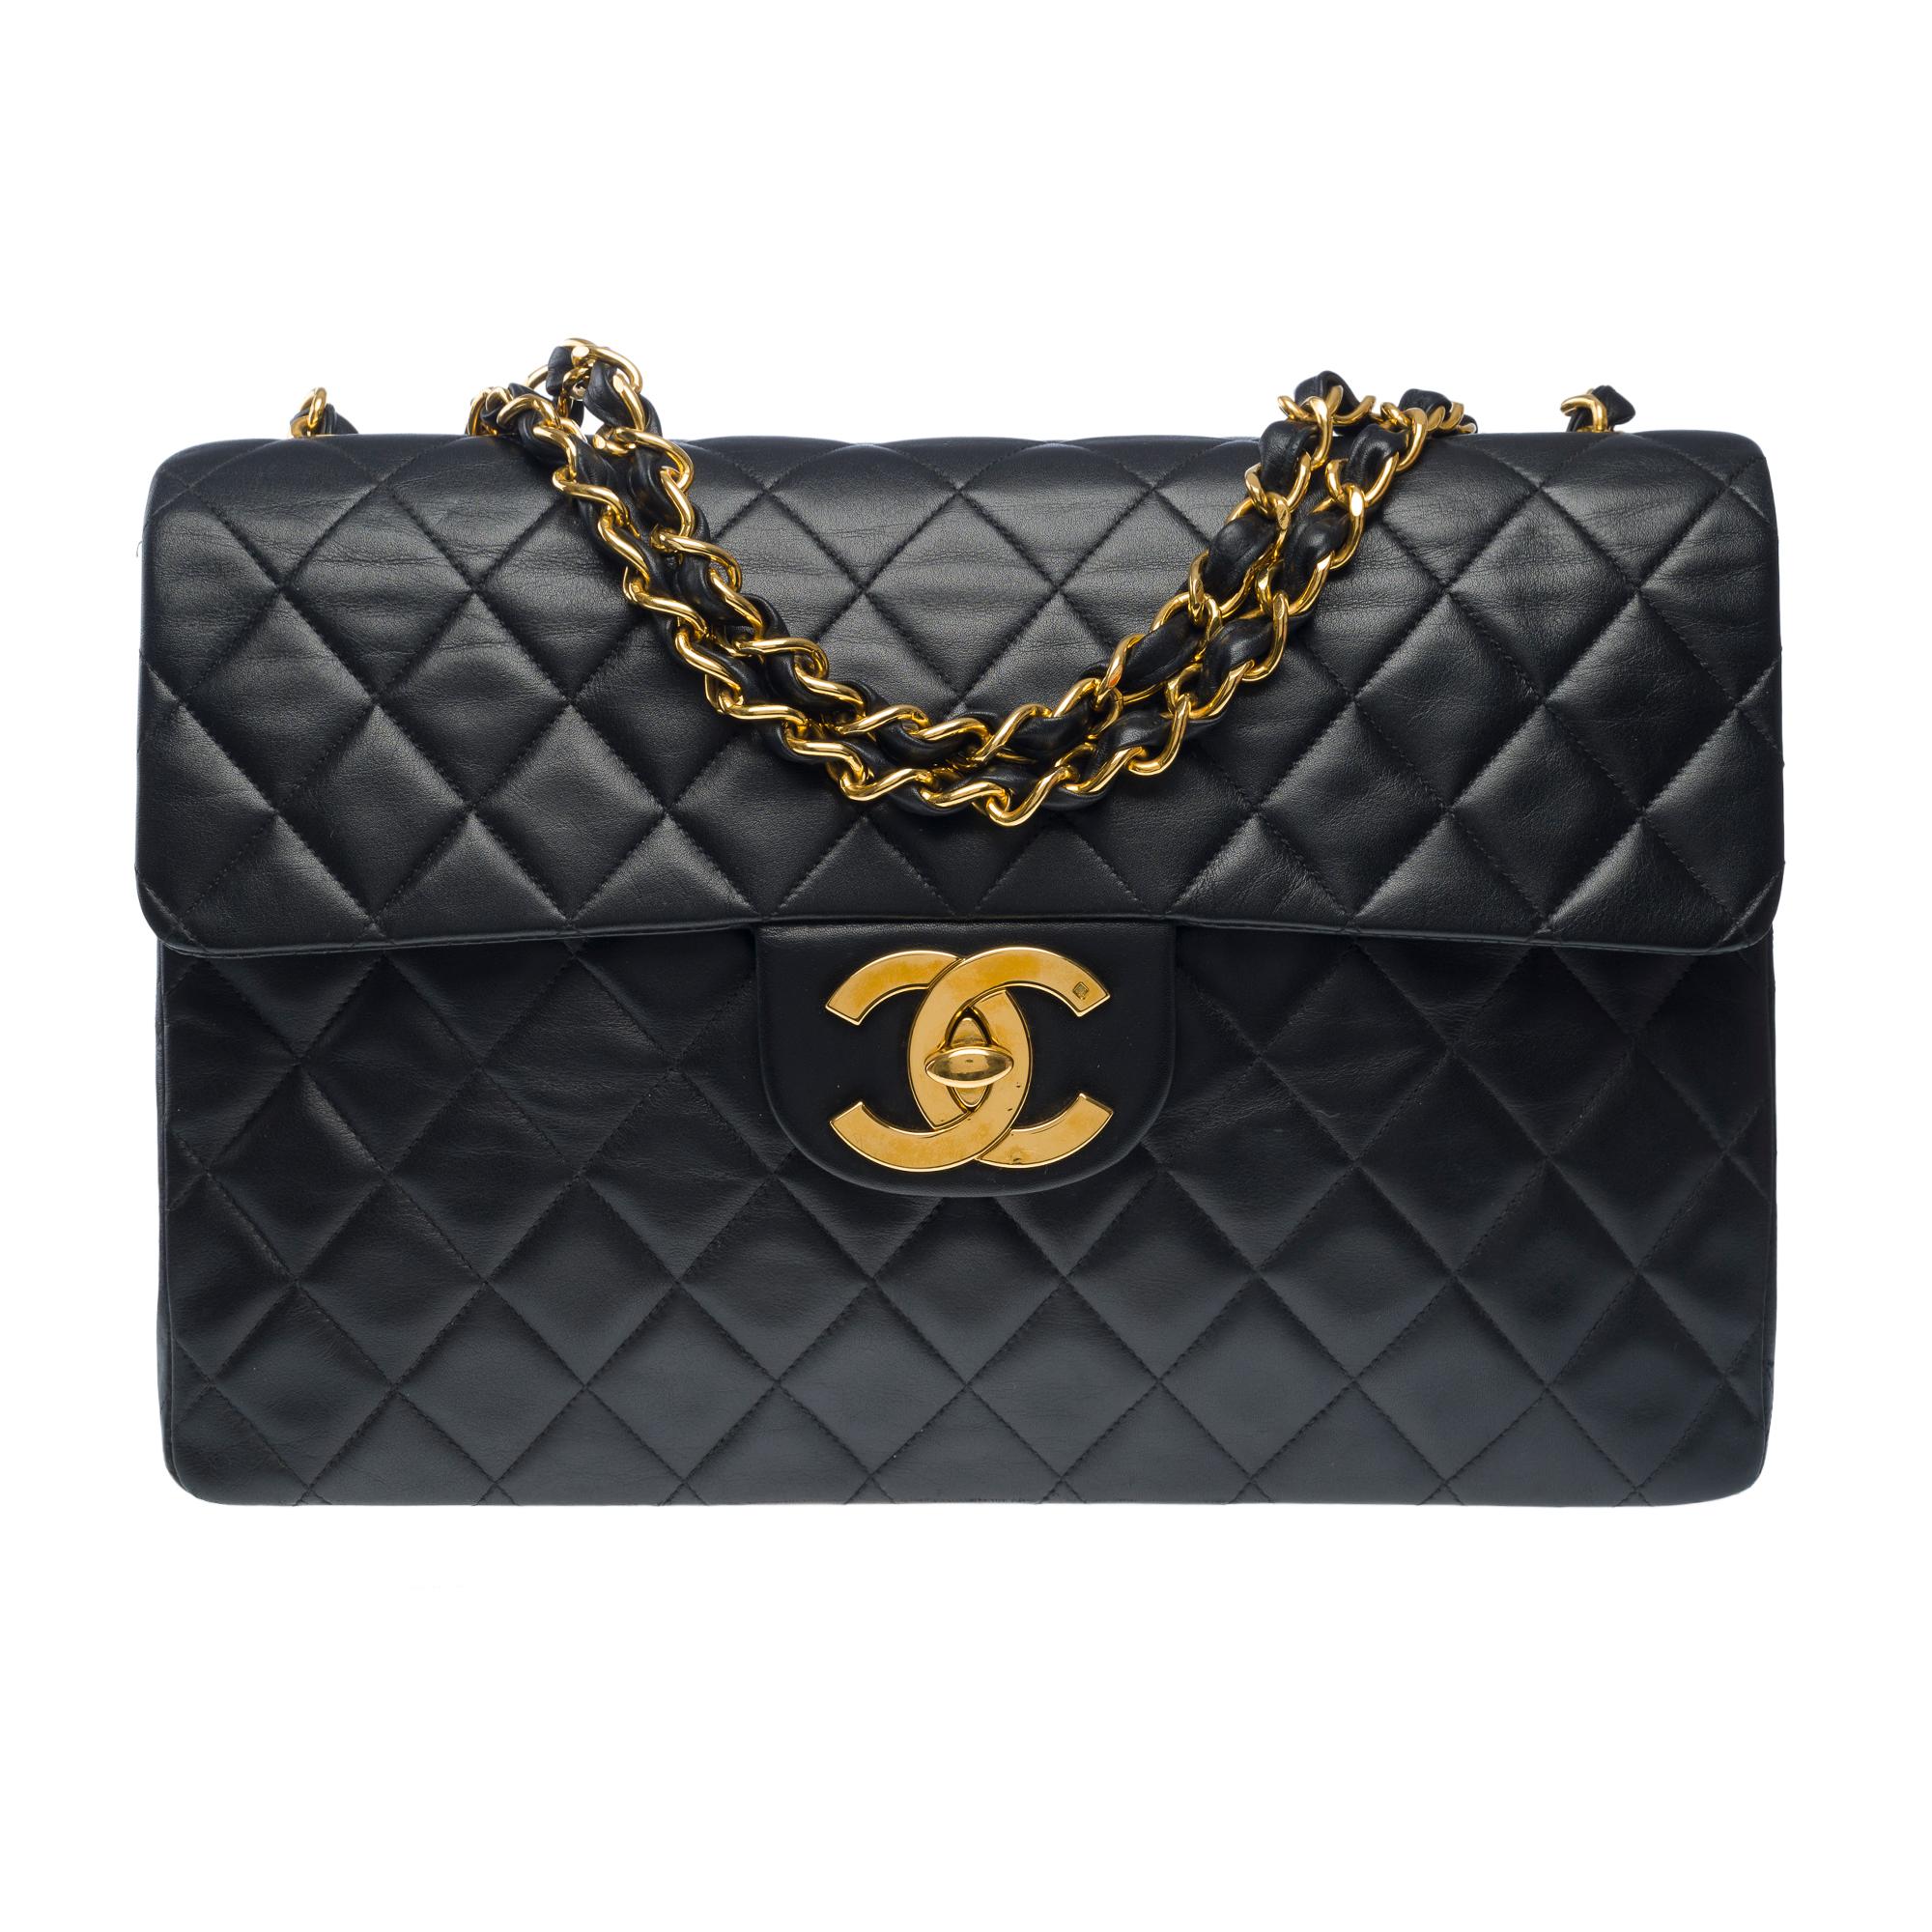 Majestic​ ​Chanel​ ​Timeless​ ​Maxi​ ​Jumbo​ ​flap​ ​bag​ ​in​ ​black​ ​quilted​ ​lambskin​ ​leather,​ ​gold​ ​metal​ ​trim,​ ​a​ ​gold​ ​metal​ ​chain​ ​handle​ ​interlaced​ ​with​ ​black​ ​leather​ ​for​ ​a​ ​shoulder​ ​or​ ​crossbody​ ​carry

A​